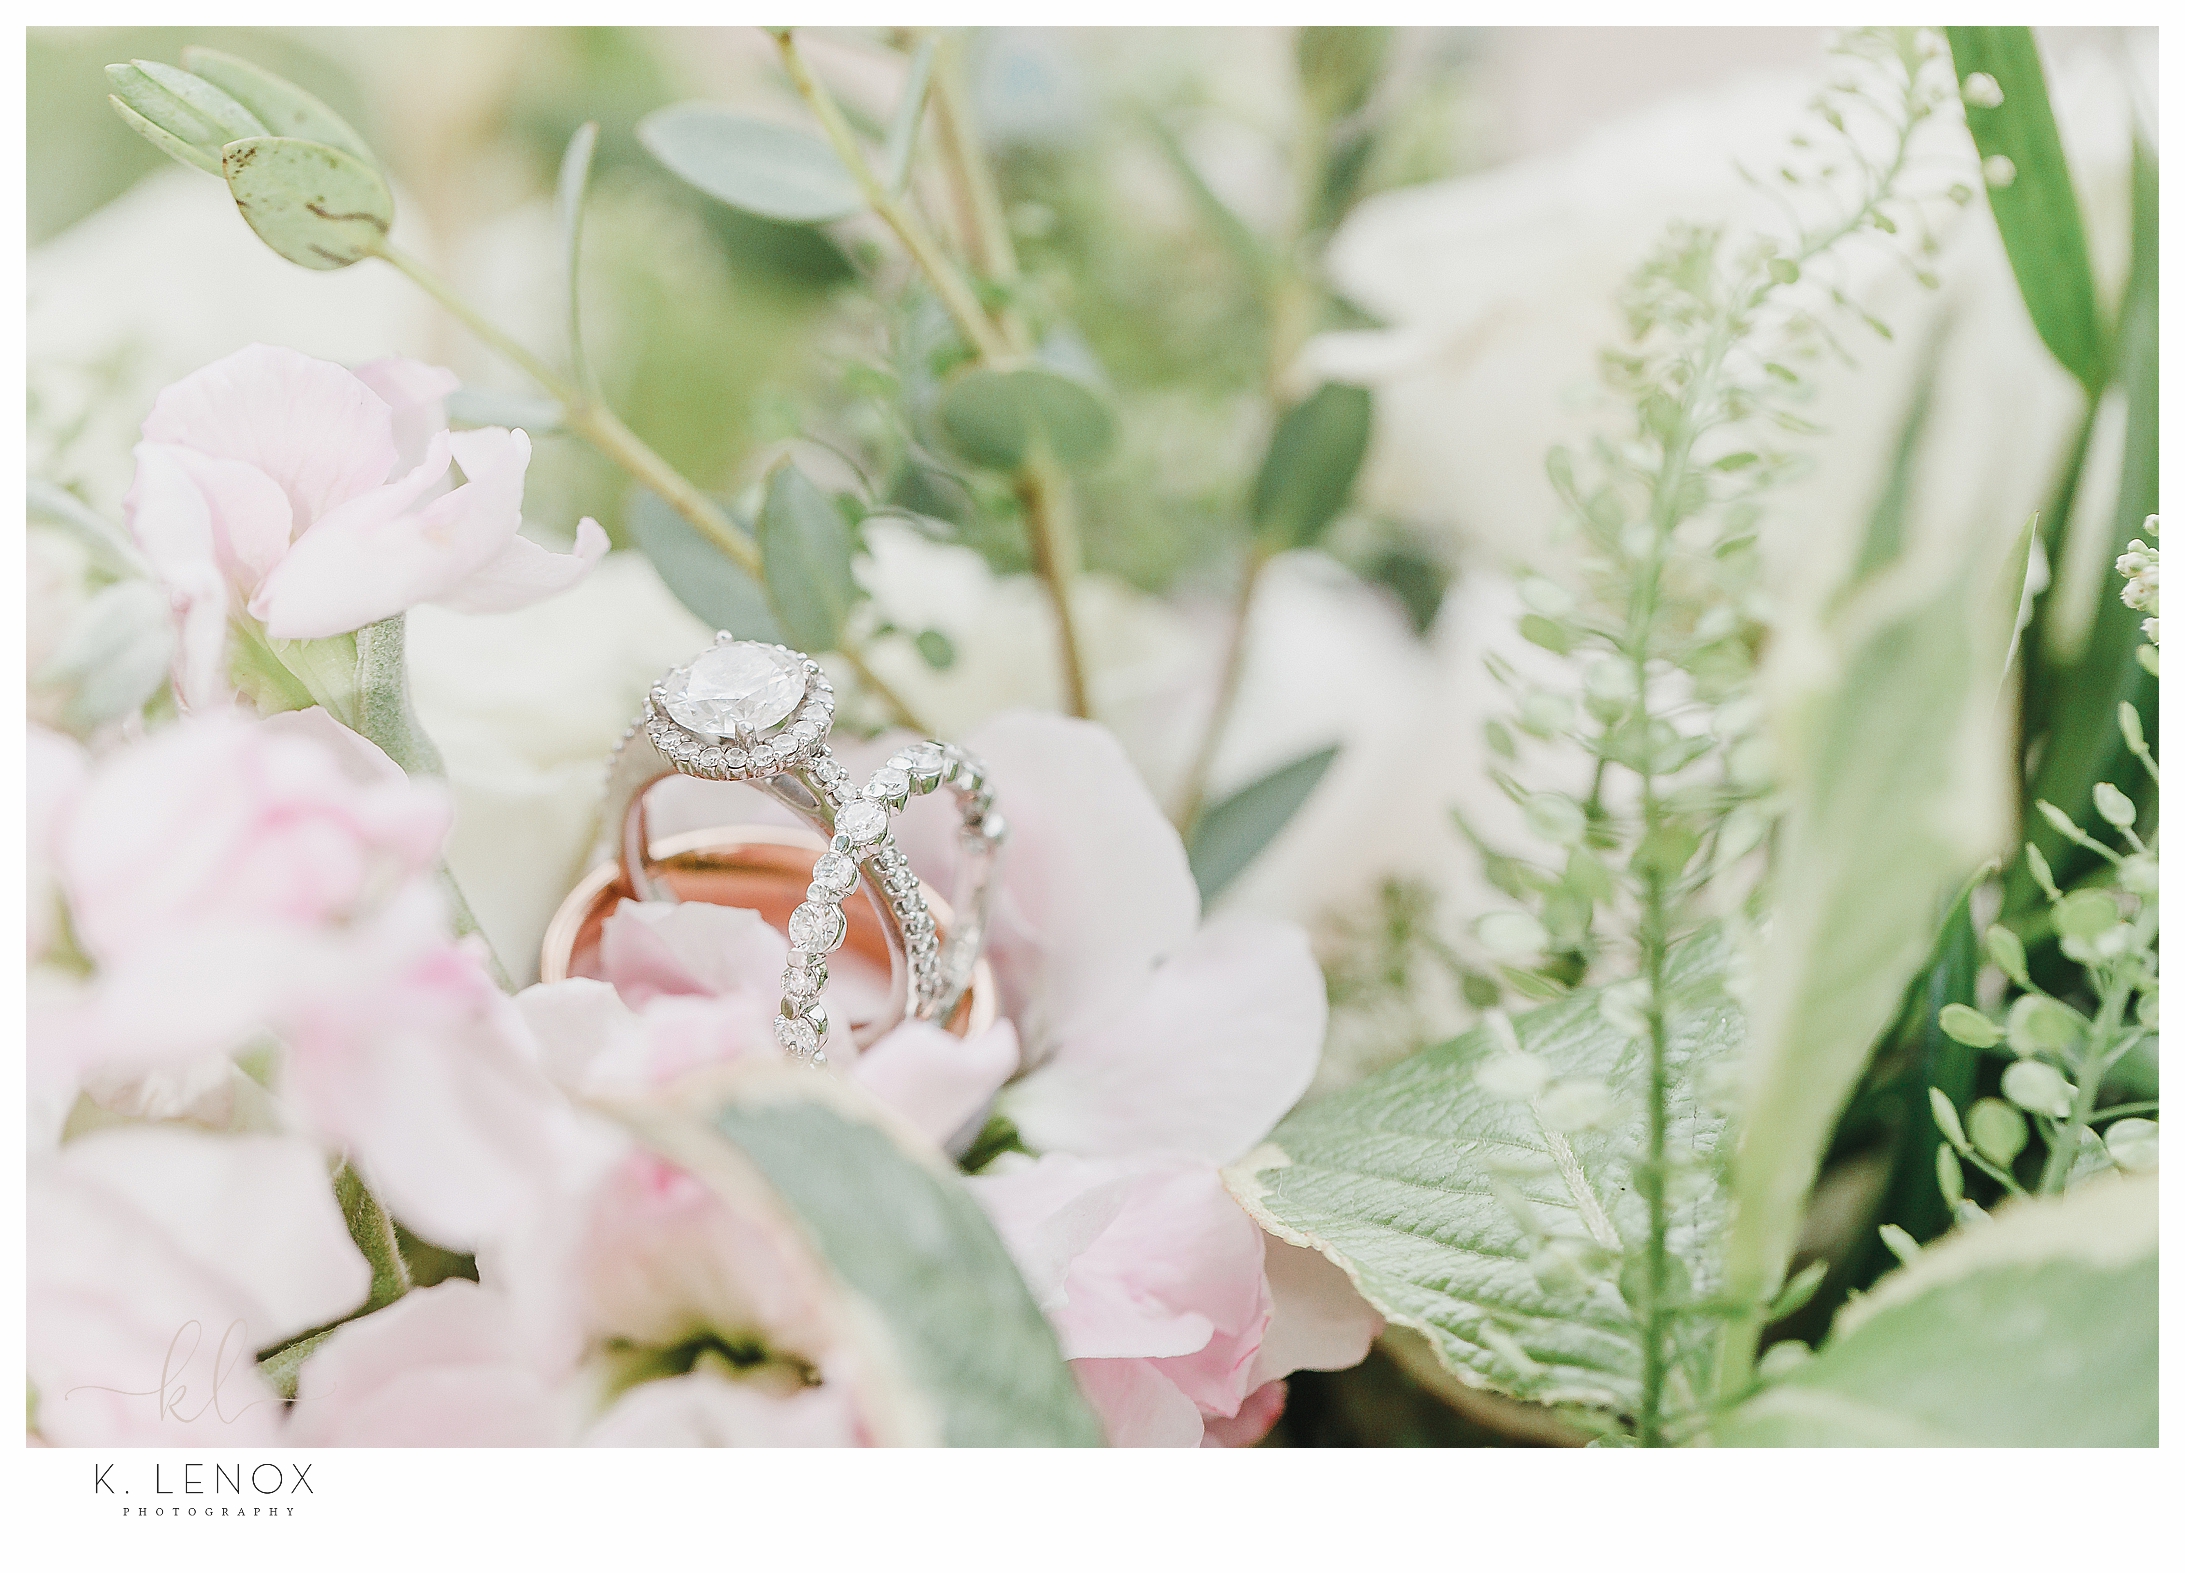 Light and Airy photo of the wedding rings surrounded by flowers. 